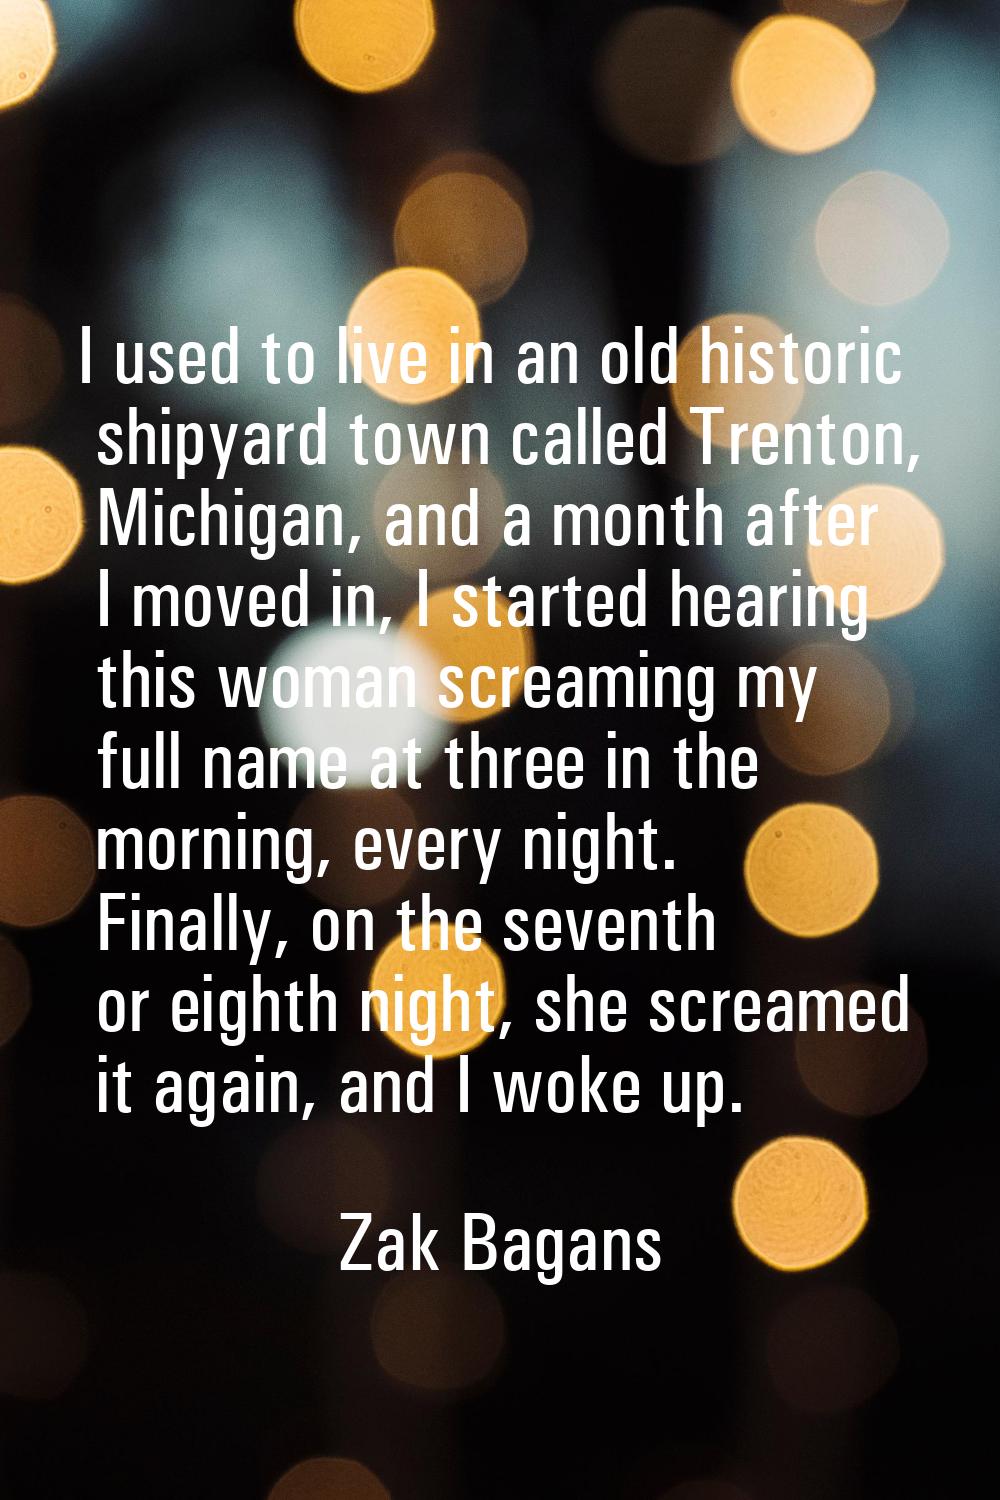 I used to live in an old historic shipyard town called Trenton, Michigan, and a month after I moved